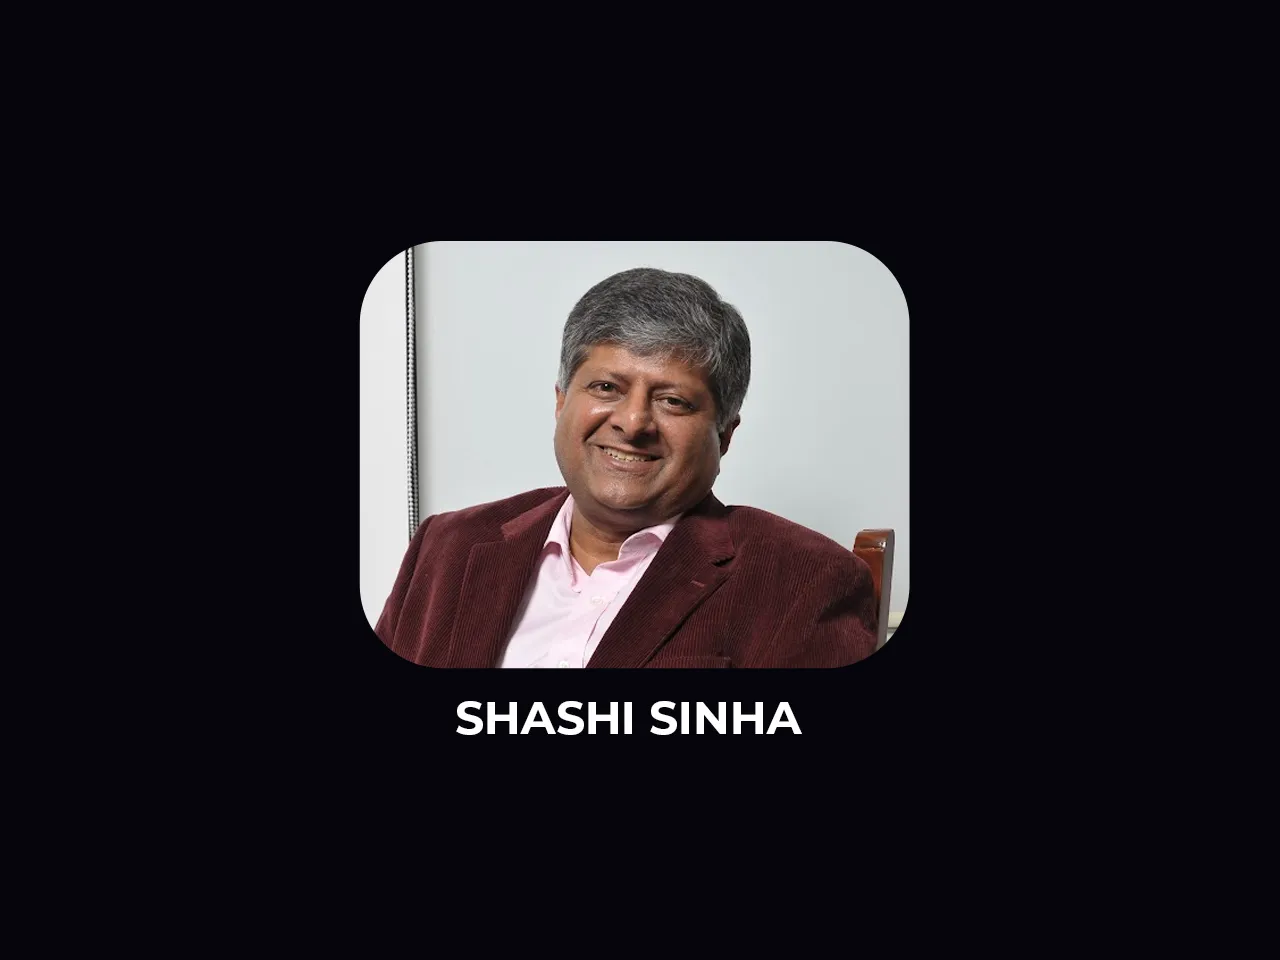 Shashi Sinha to be conferred with AAAI Lifetime Achievement Award 2023